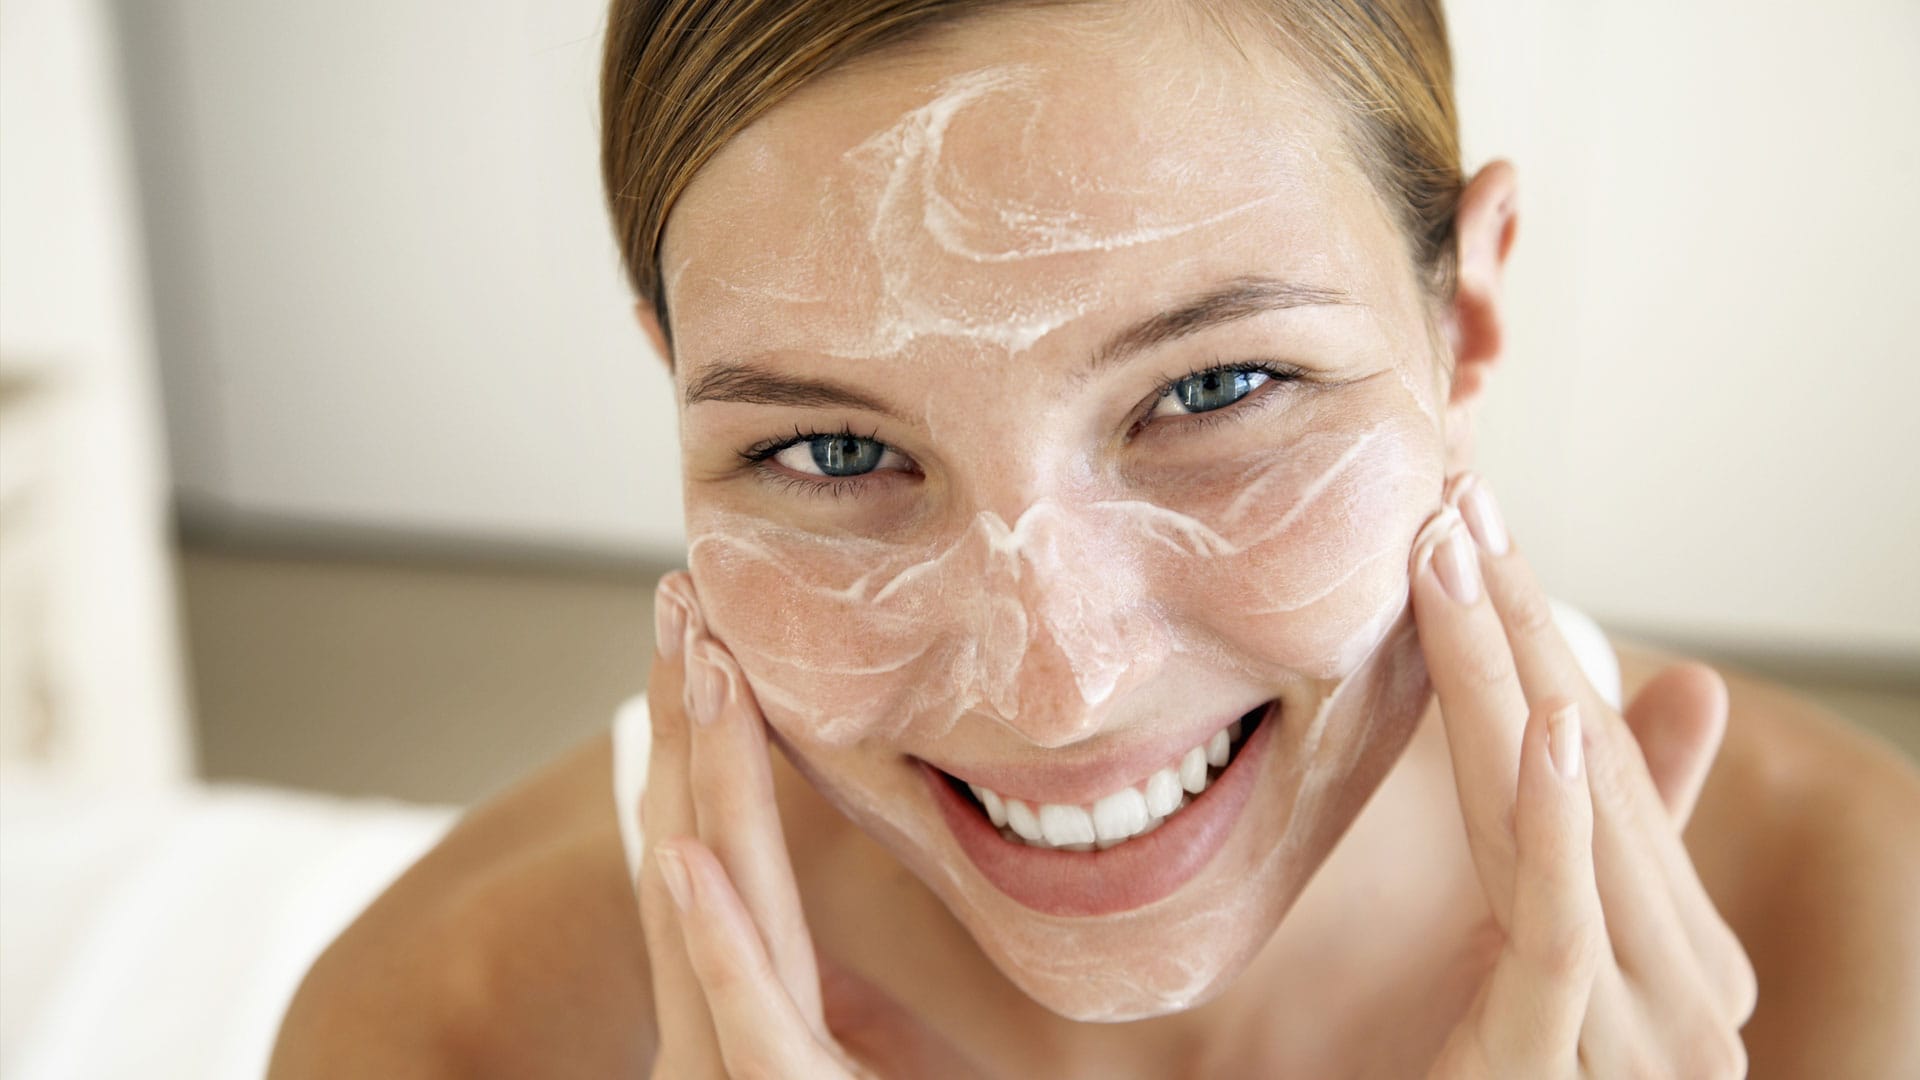 Moisturize Me! What Your Skin Is Telling You